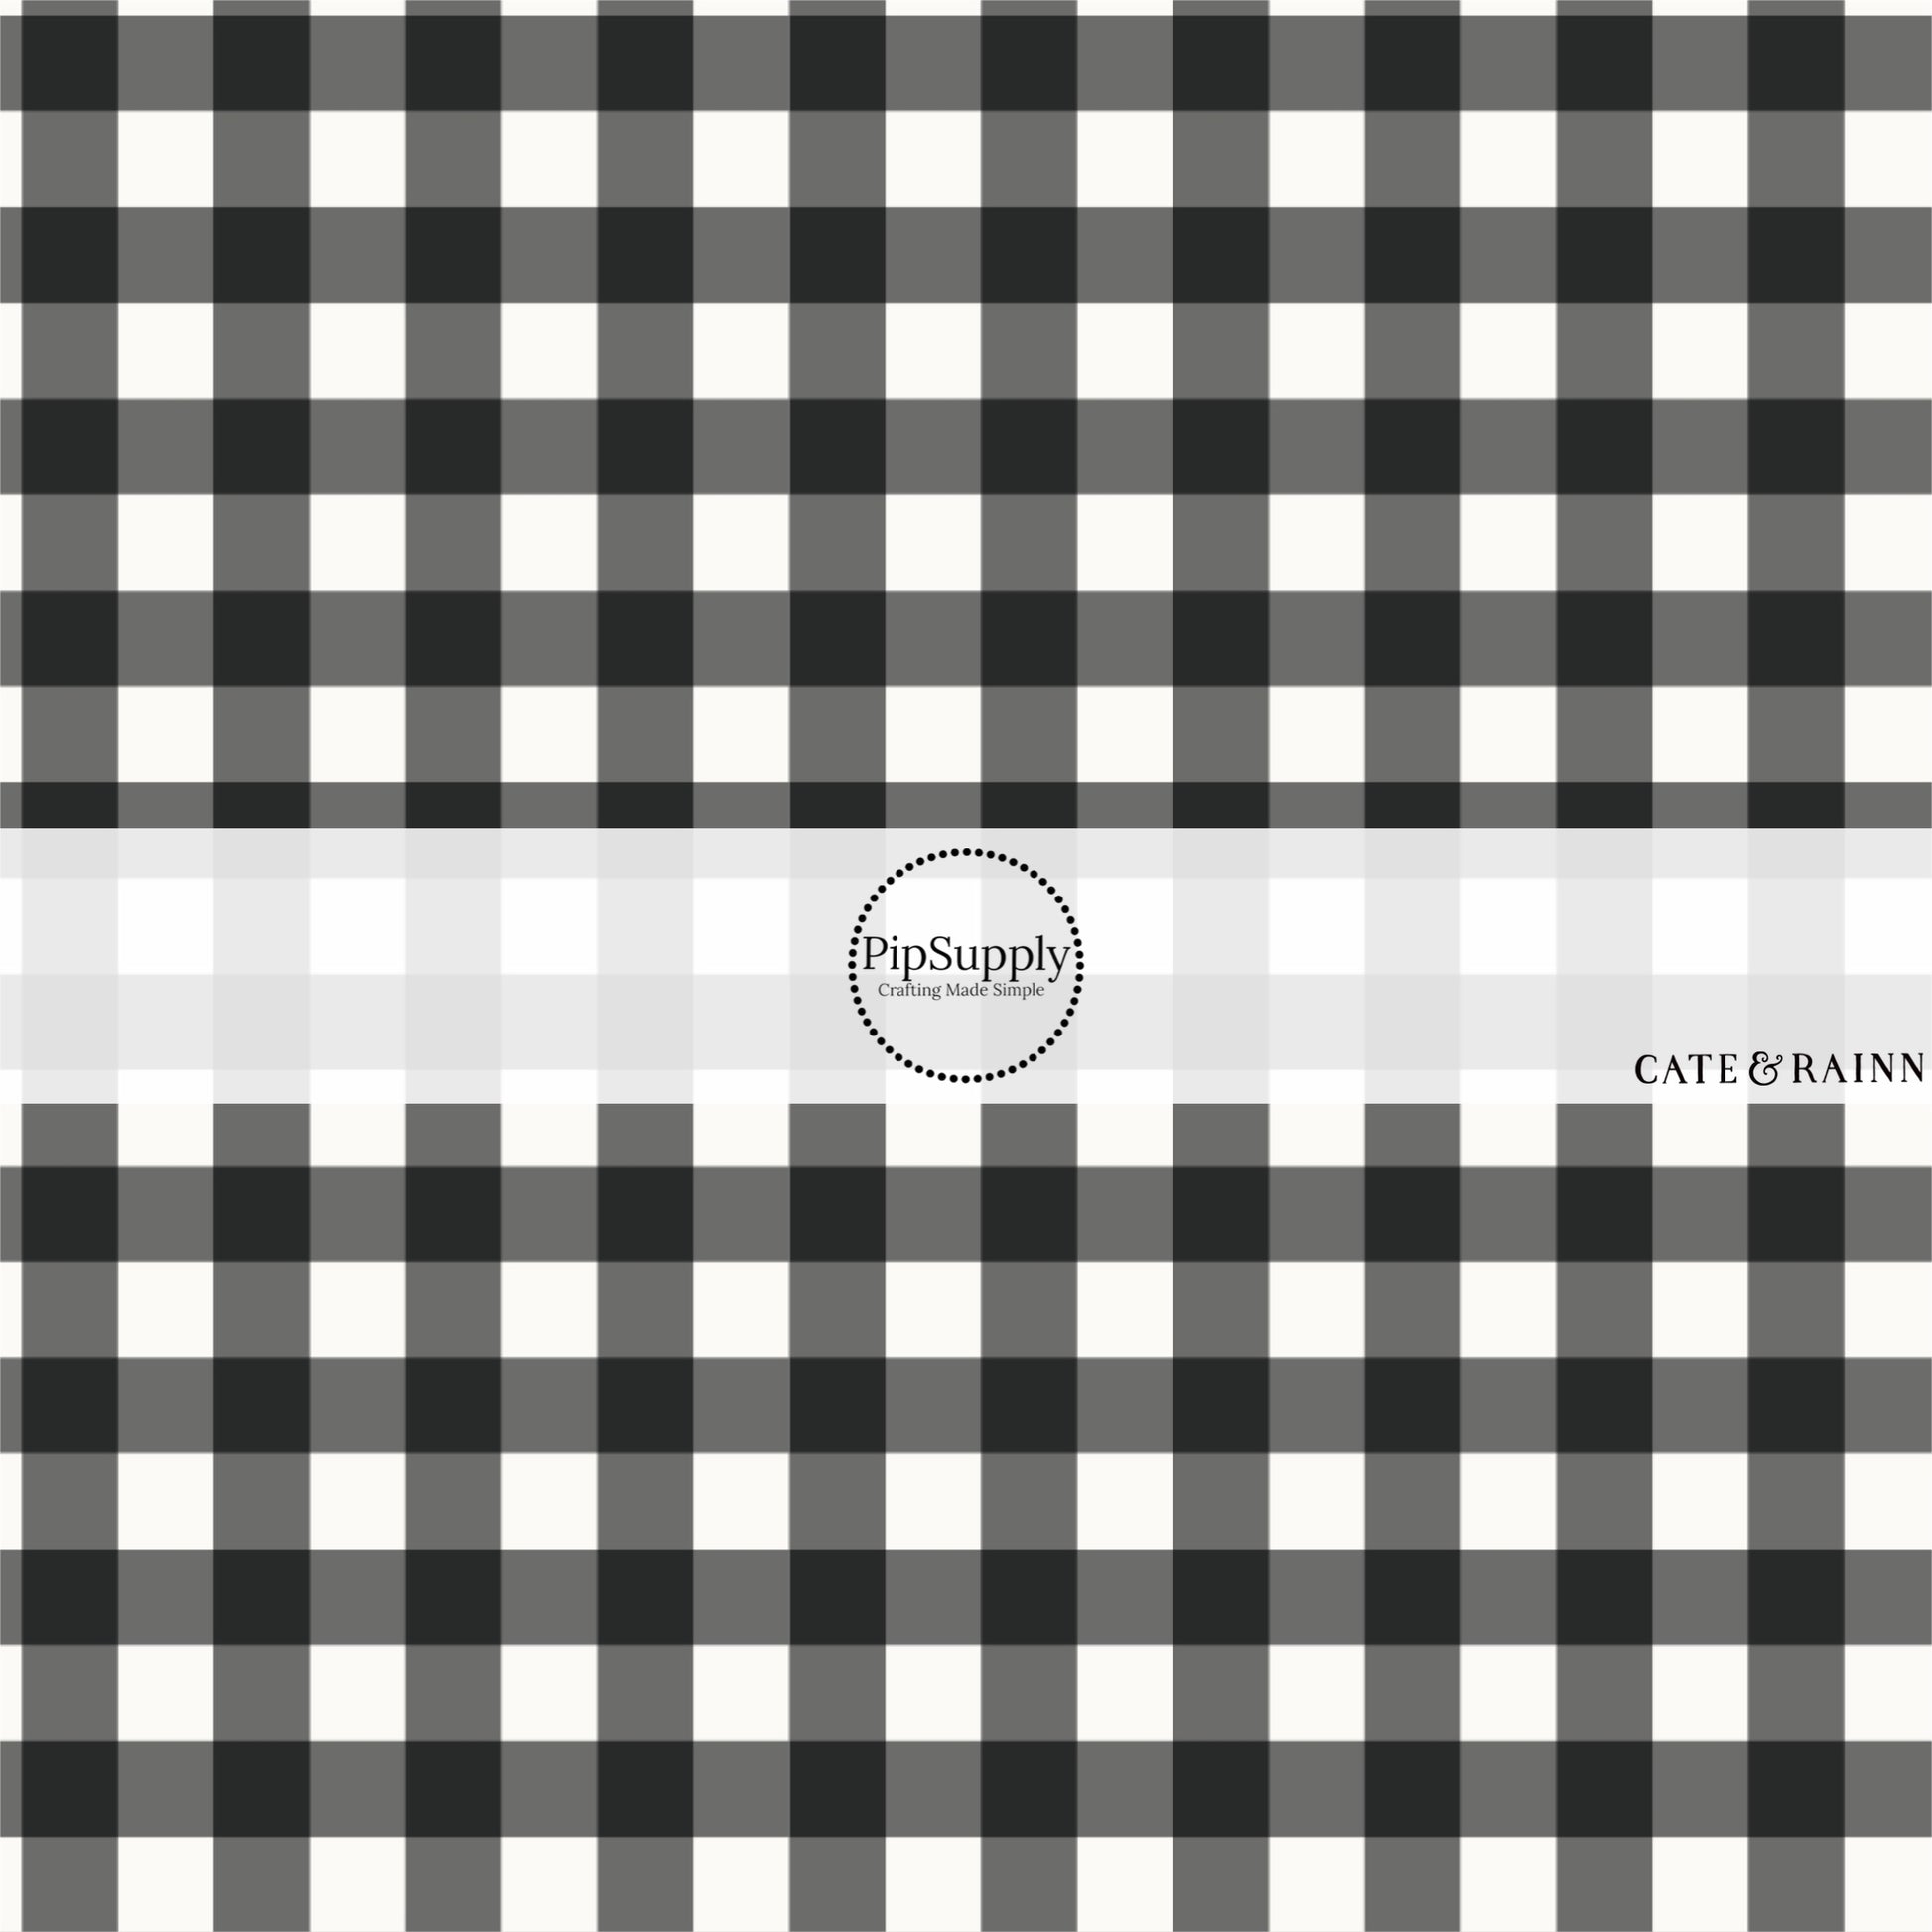 These spring and summer pattern fabric by the yard features farm and meadow plaid and stripe patterns. This fun fabric can be used for all your sewing and crafting needs!